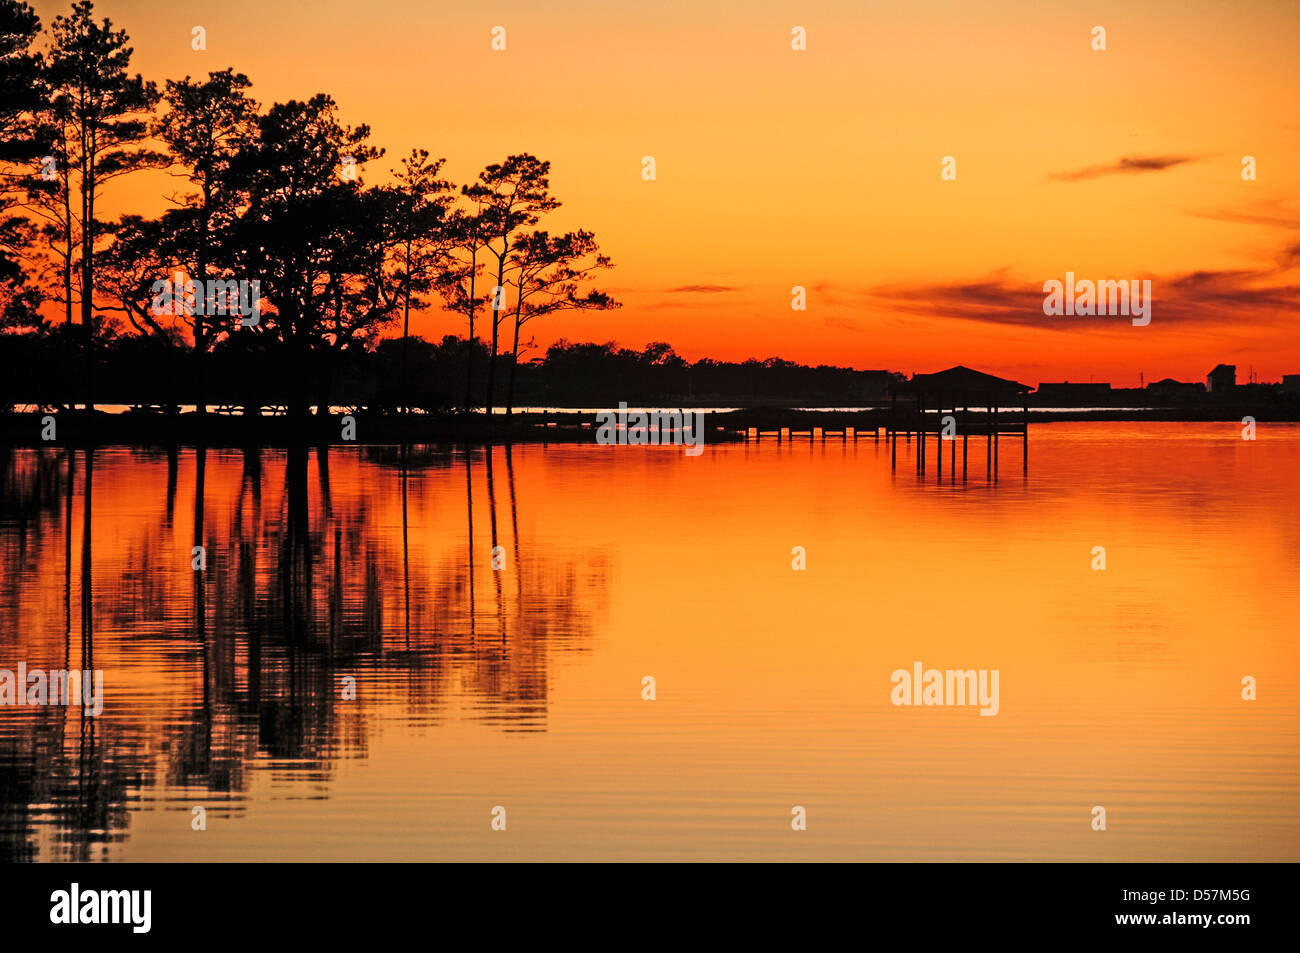 Sunset with tree reflections in calm water Stock Photo